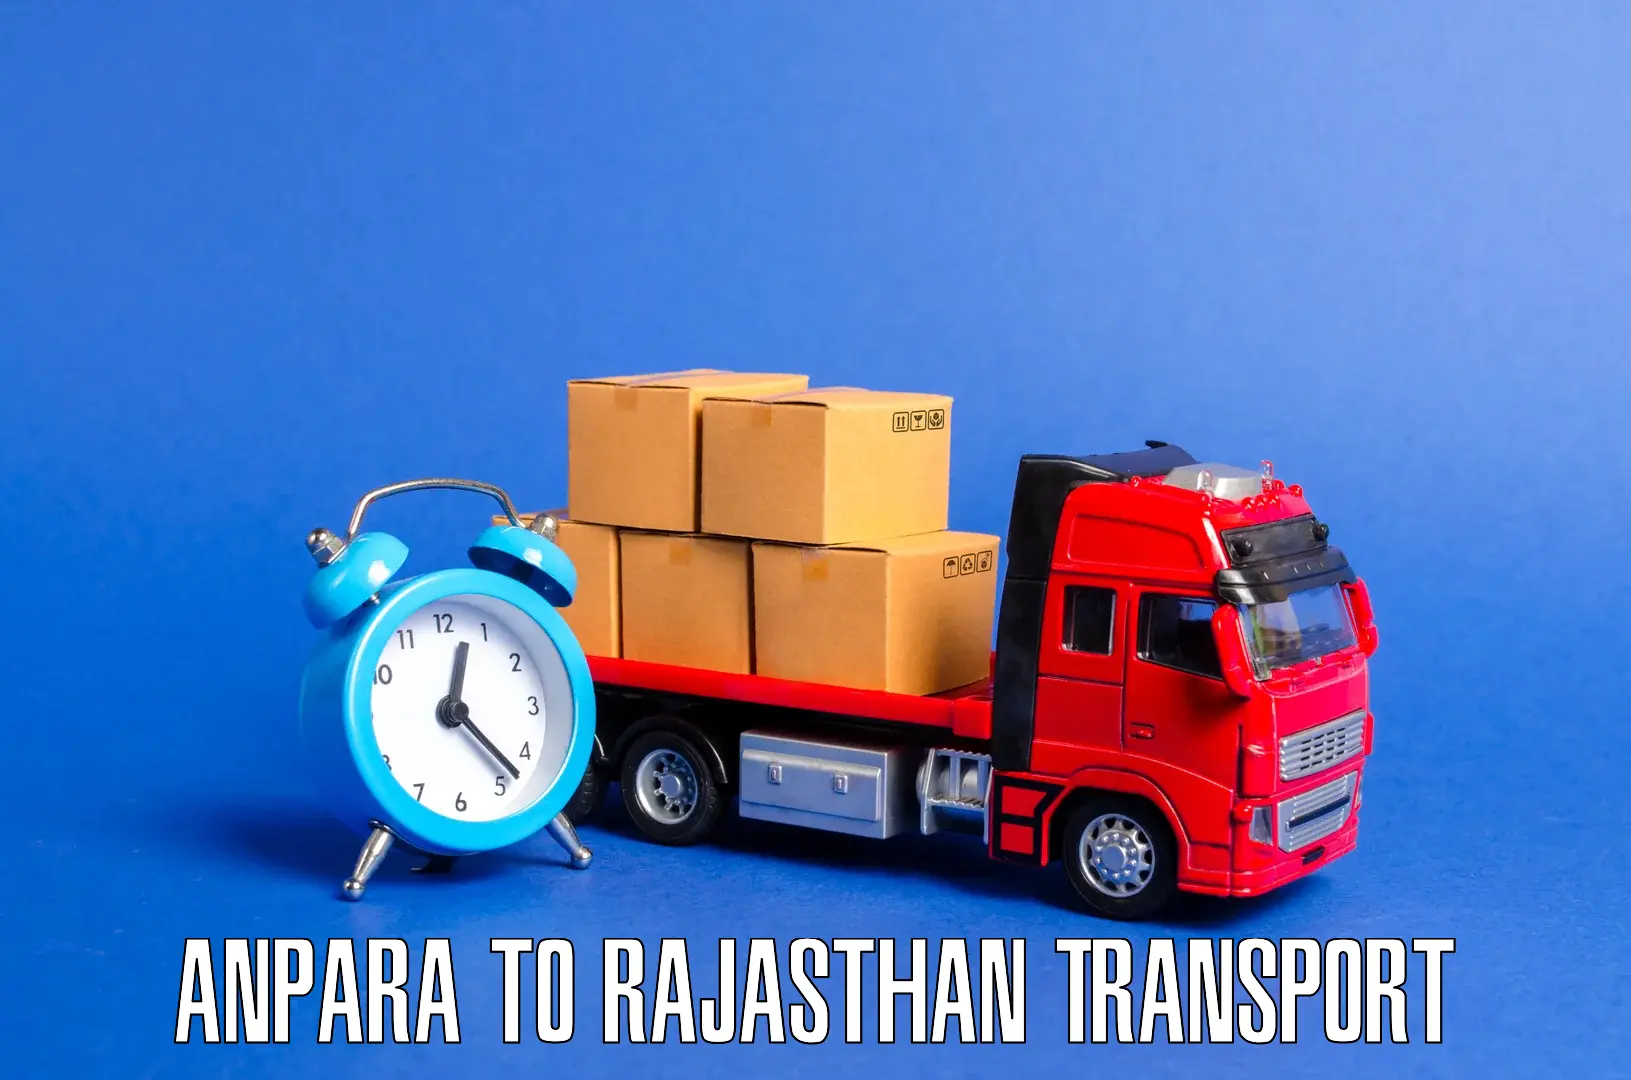 Nearby transport service Anpara to Rajasthan